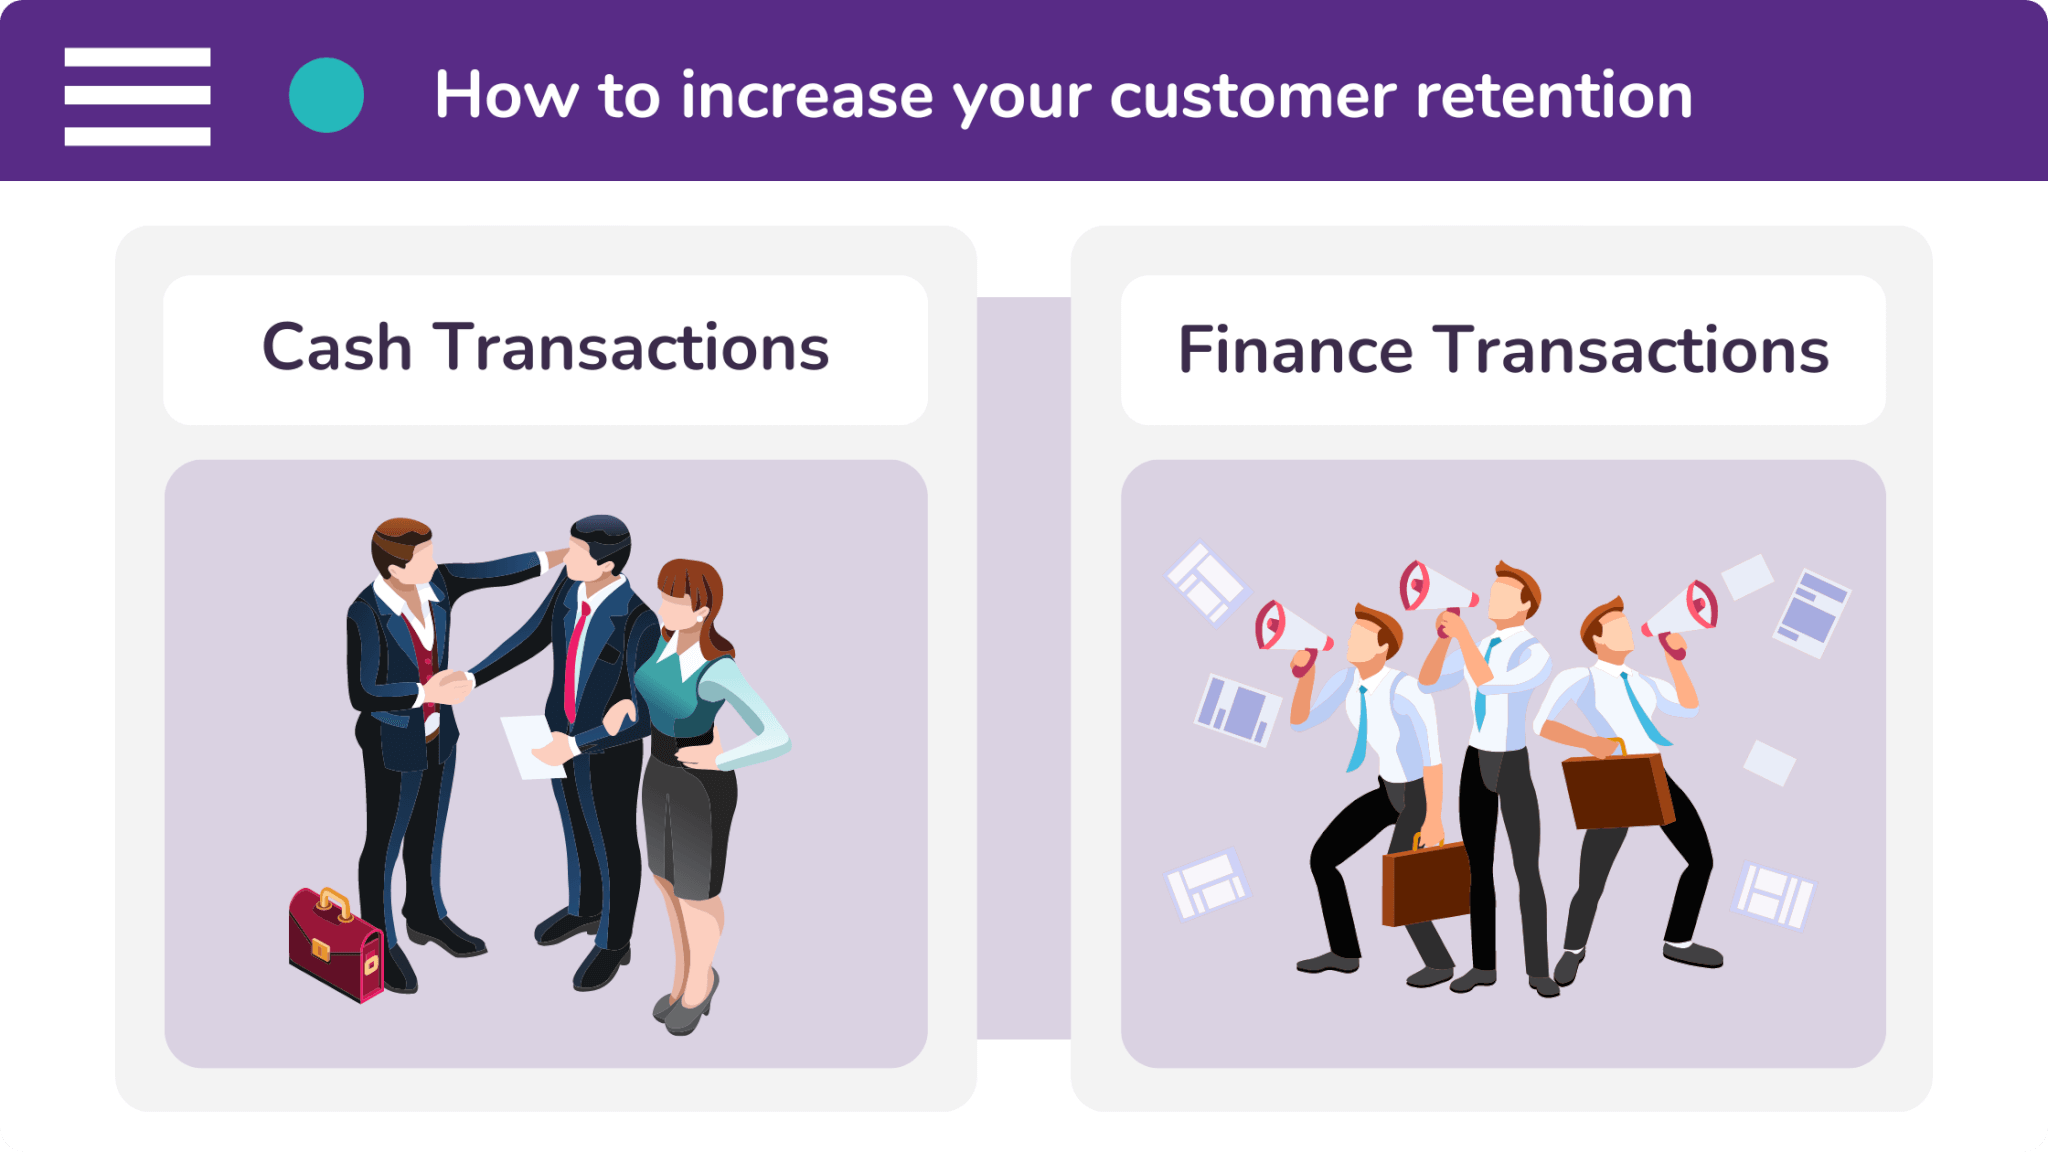 When it comes to customer retention, you are better off allowing your customers to pay on finance than simply having them pay in cash.